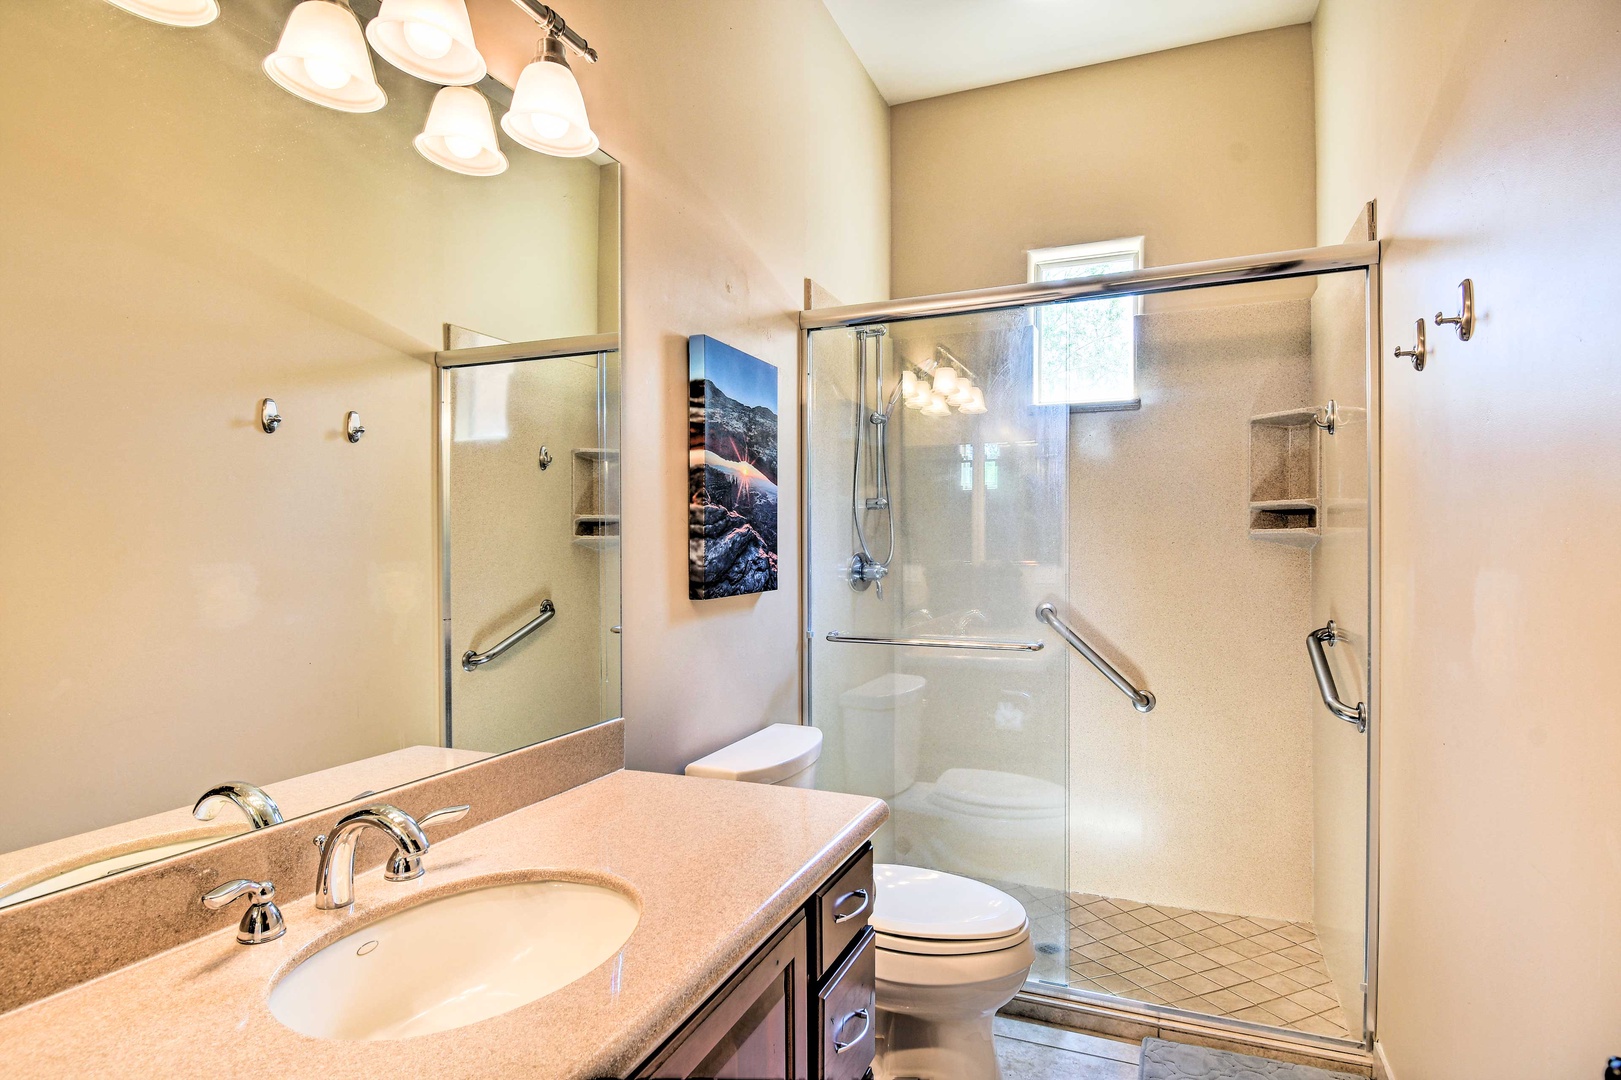 The final shared full bathroom offers a single vanity & glass shower